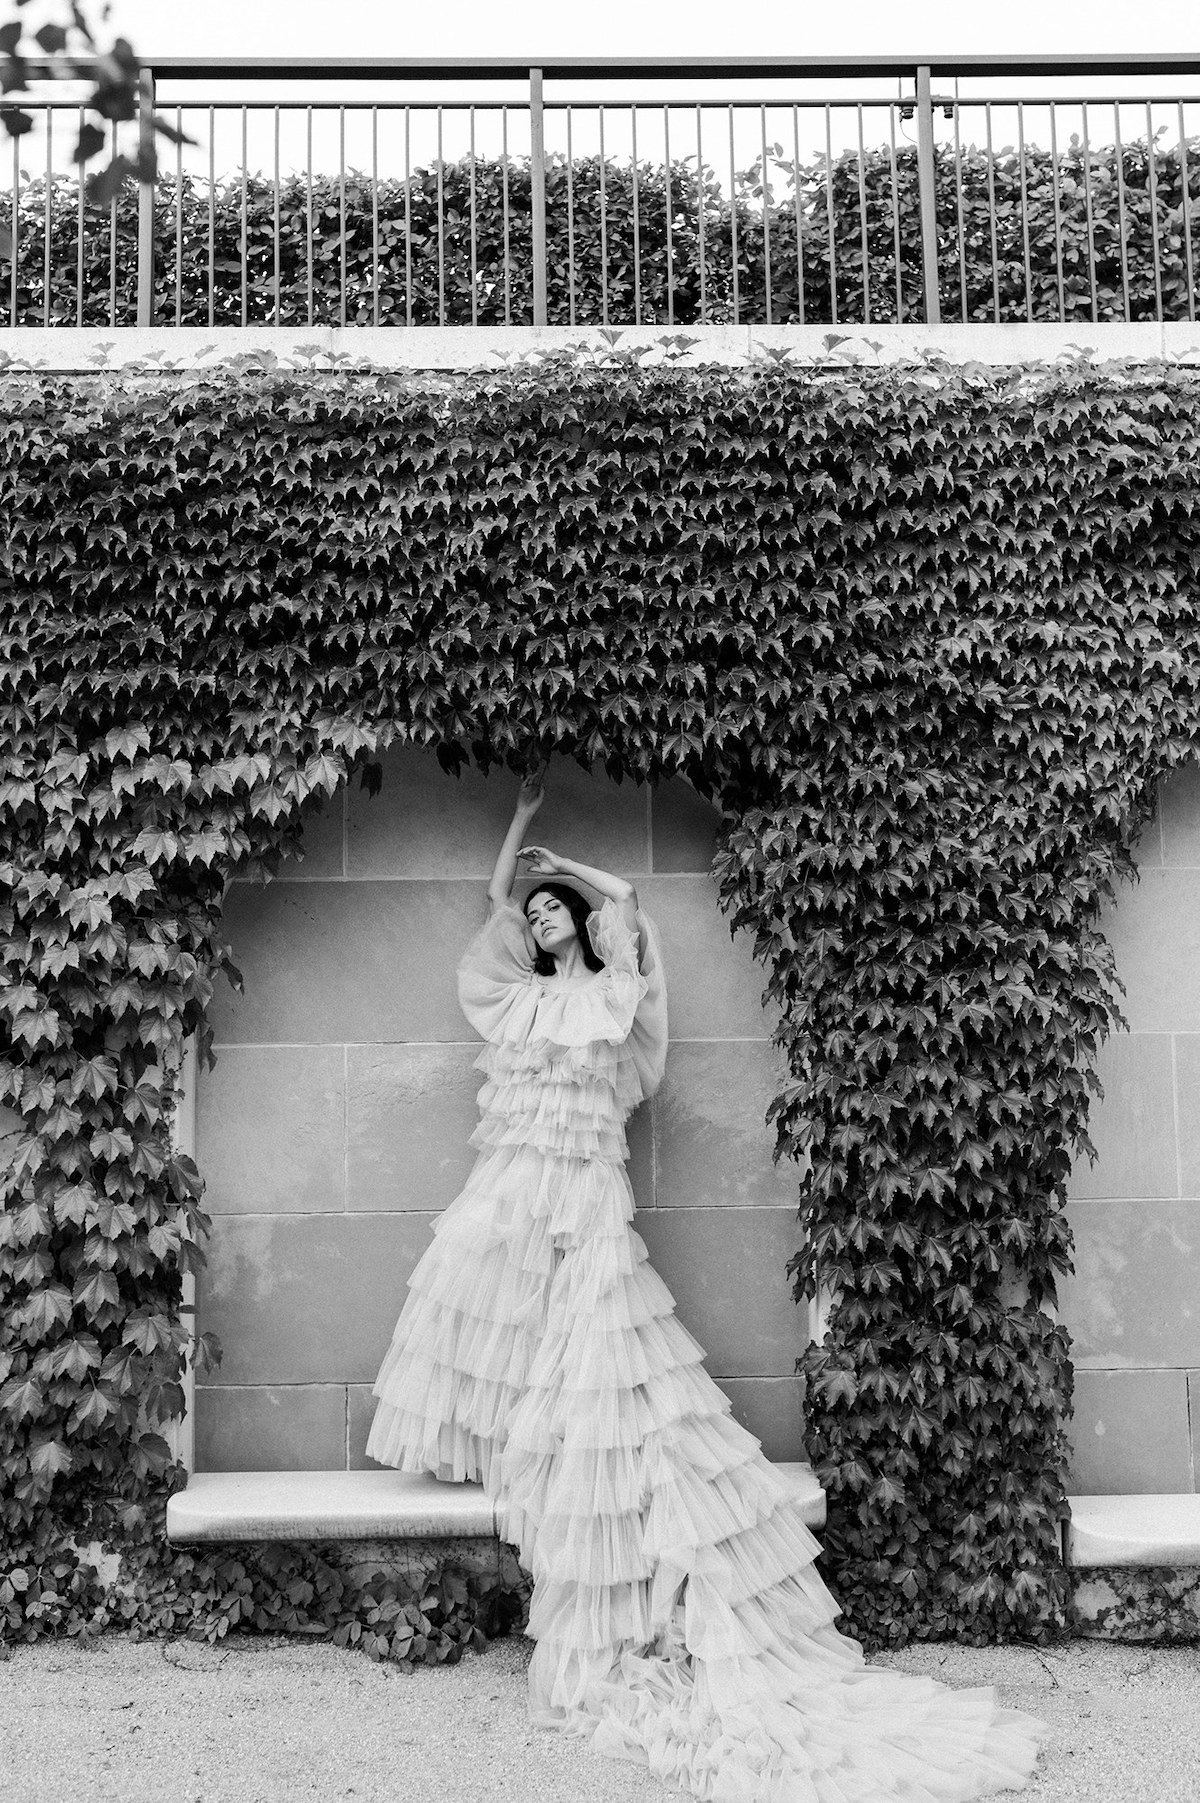 In this high fashion black and white shot, the bride embodies strength and softness, creating a captivating editorial moment.